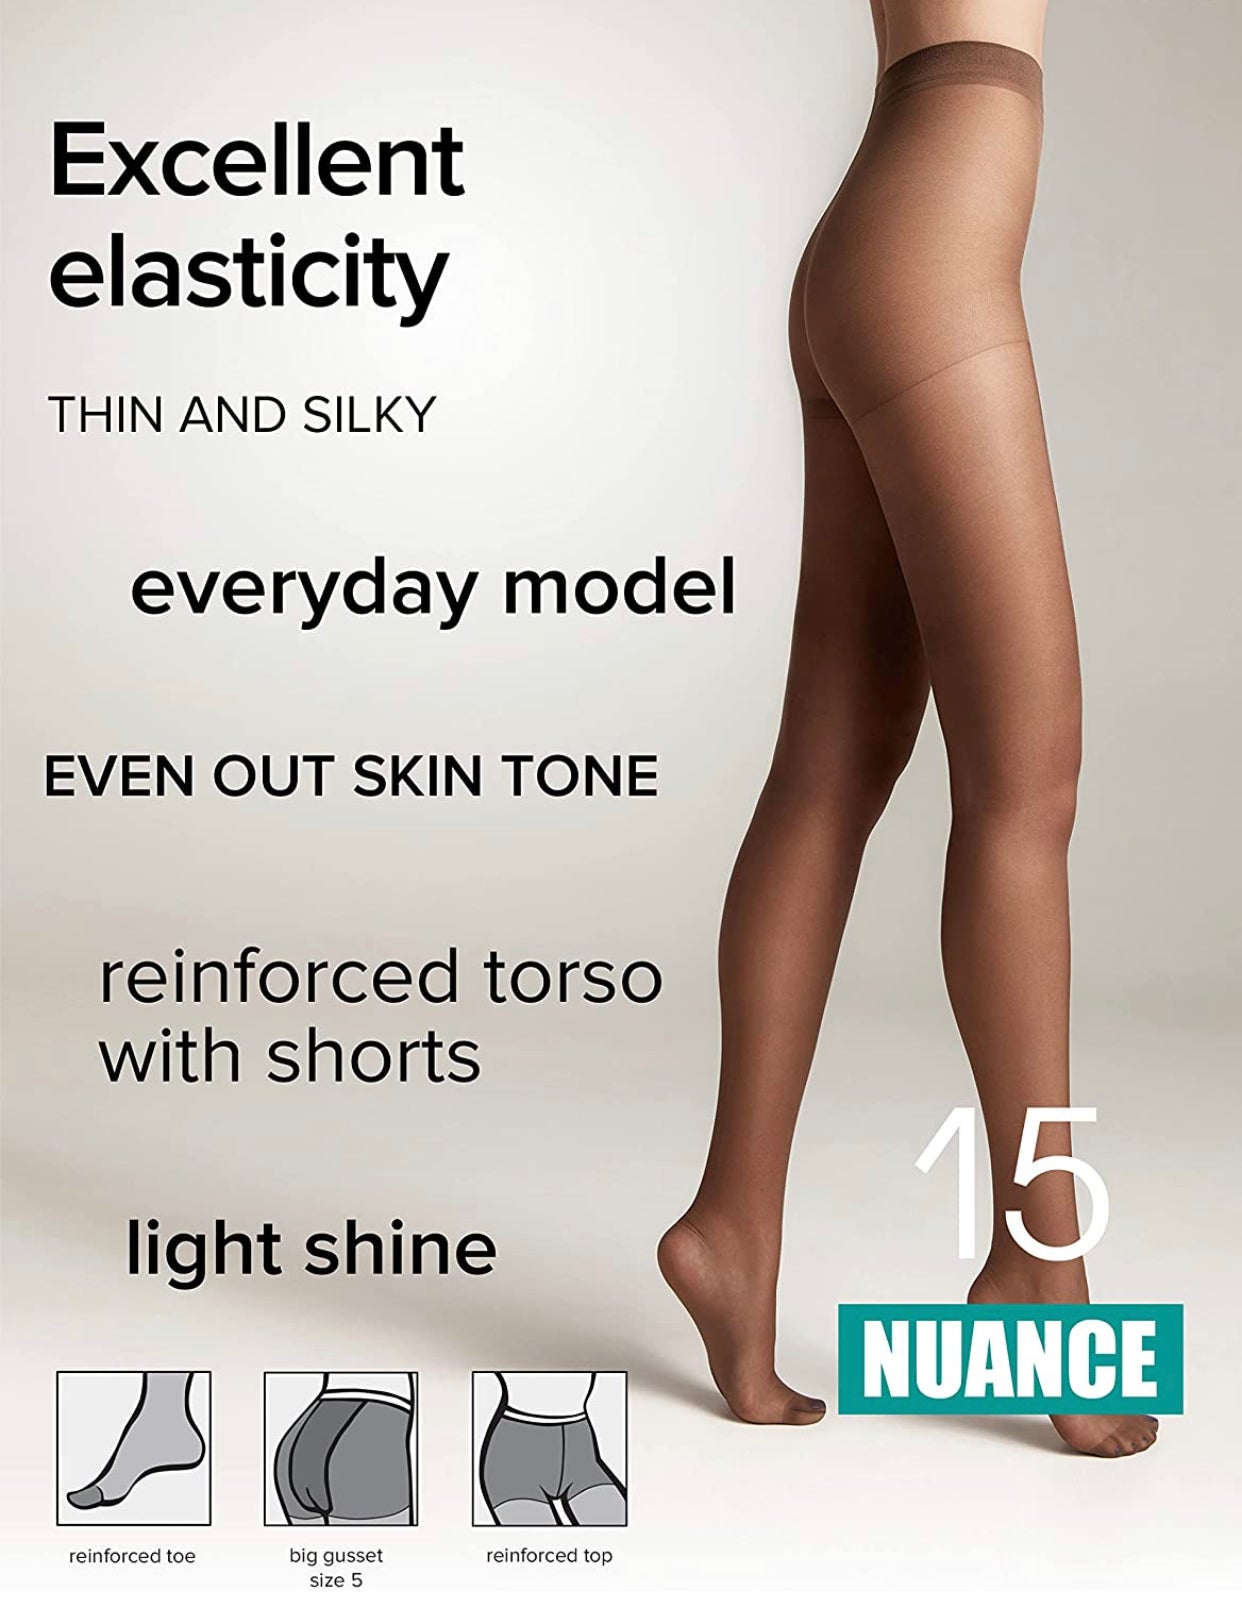 Conte Nuance 15 Den - Classic Women's Tights With a Reinforced Shorts (8С-35СП)